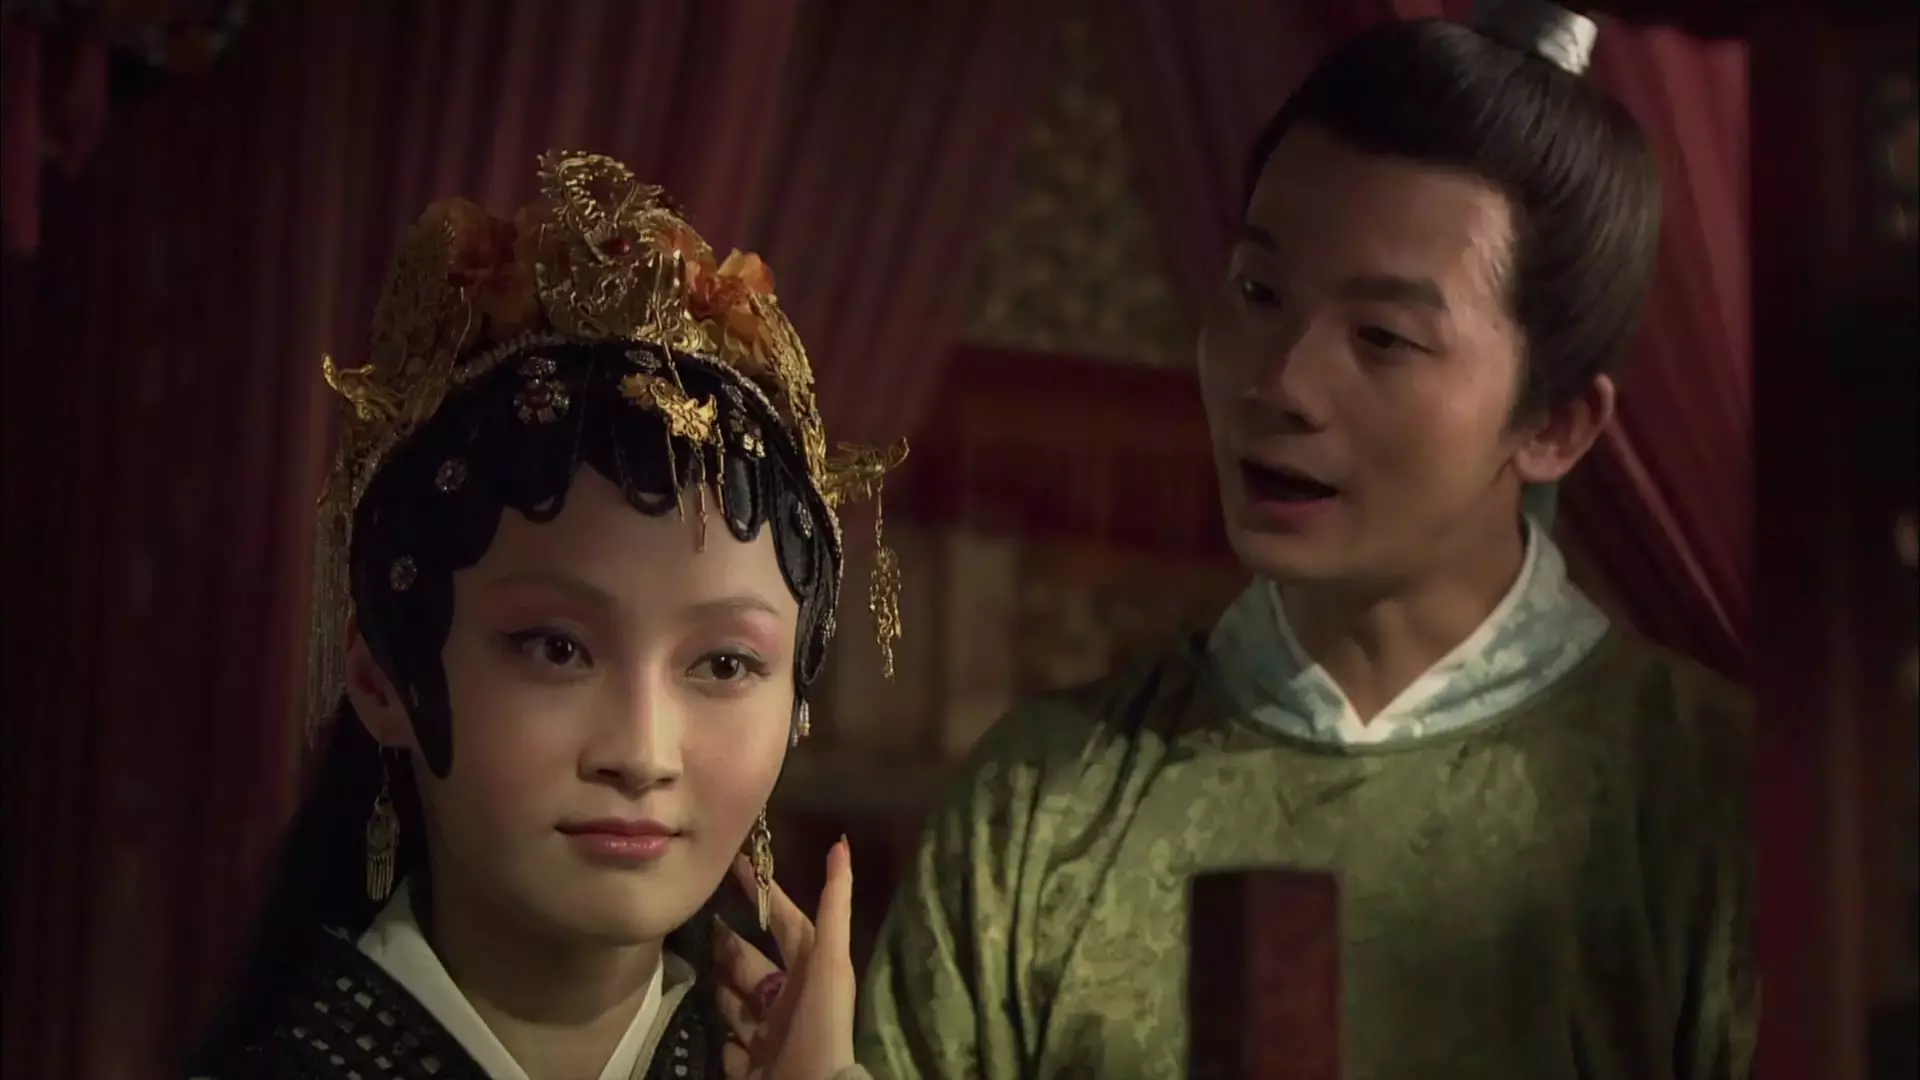 Mengjie Jiang with a serious face with a man talking to her. Mengjie wearing a headdress in a scene from The Dream of Red Mansions, a 2010 Chinese television series.